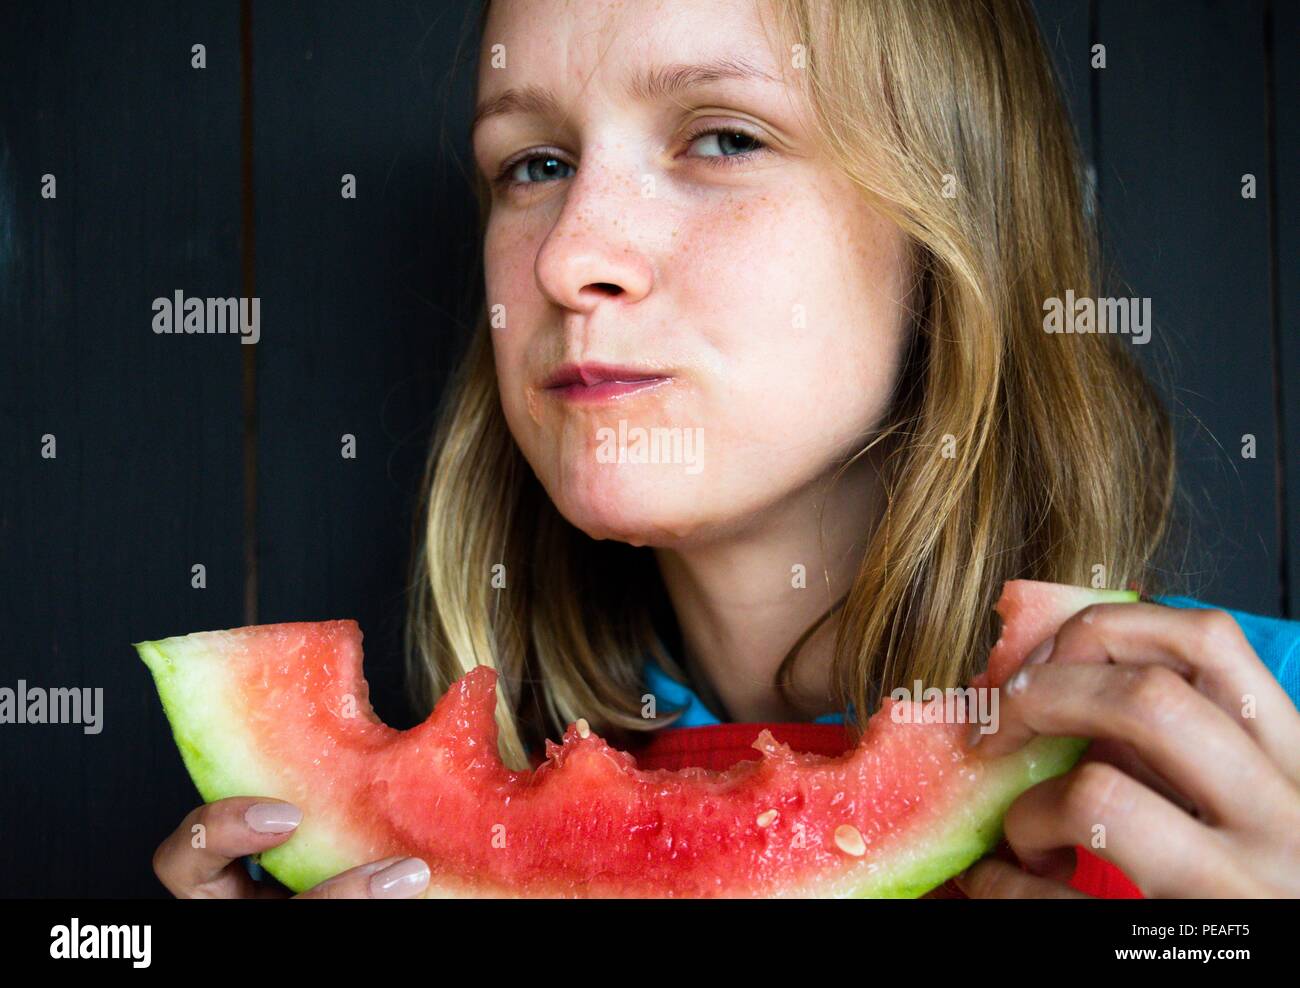 A beautiful and young girl eats a juicy watermelon. The juice drips down her chin. Watermelon is very tasty and it enjoys its taste. Stock Photo